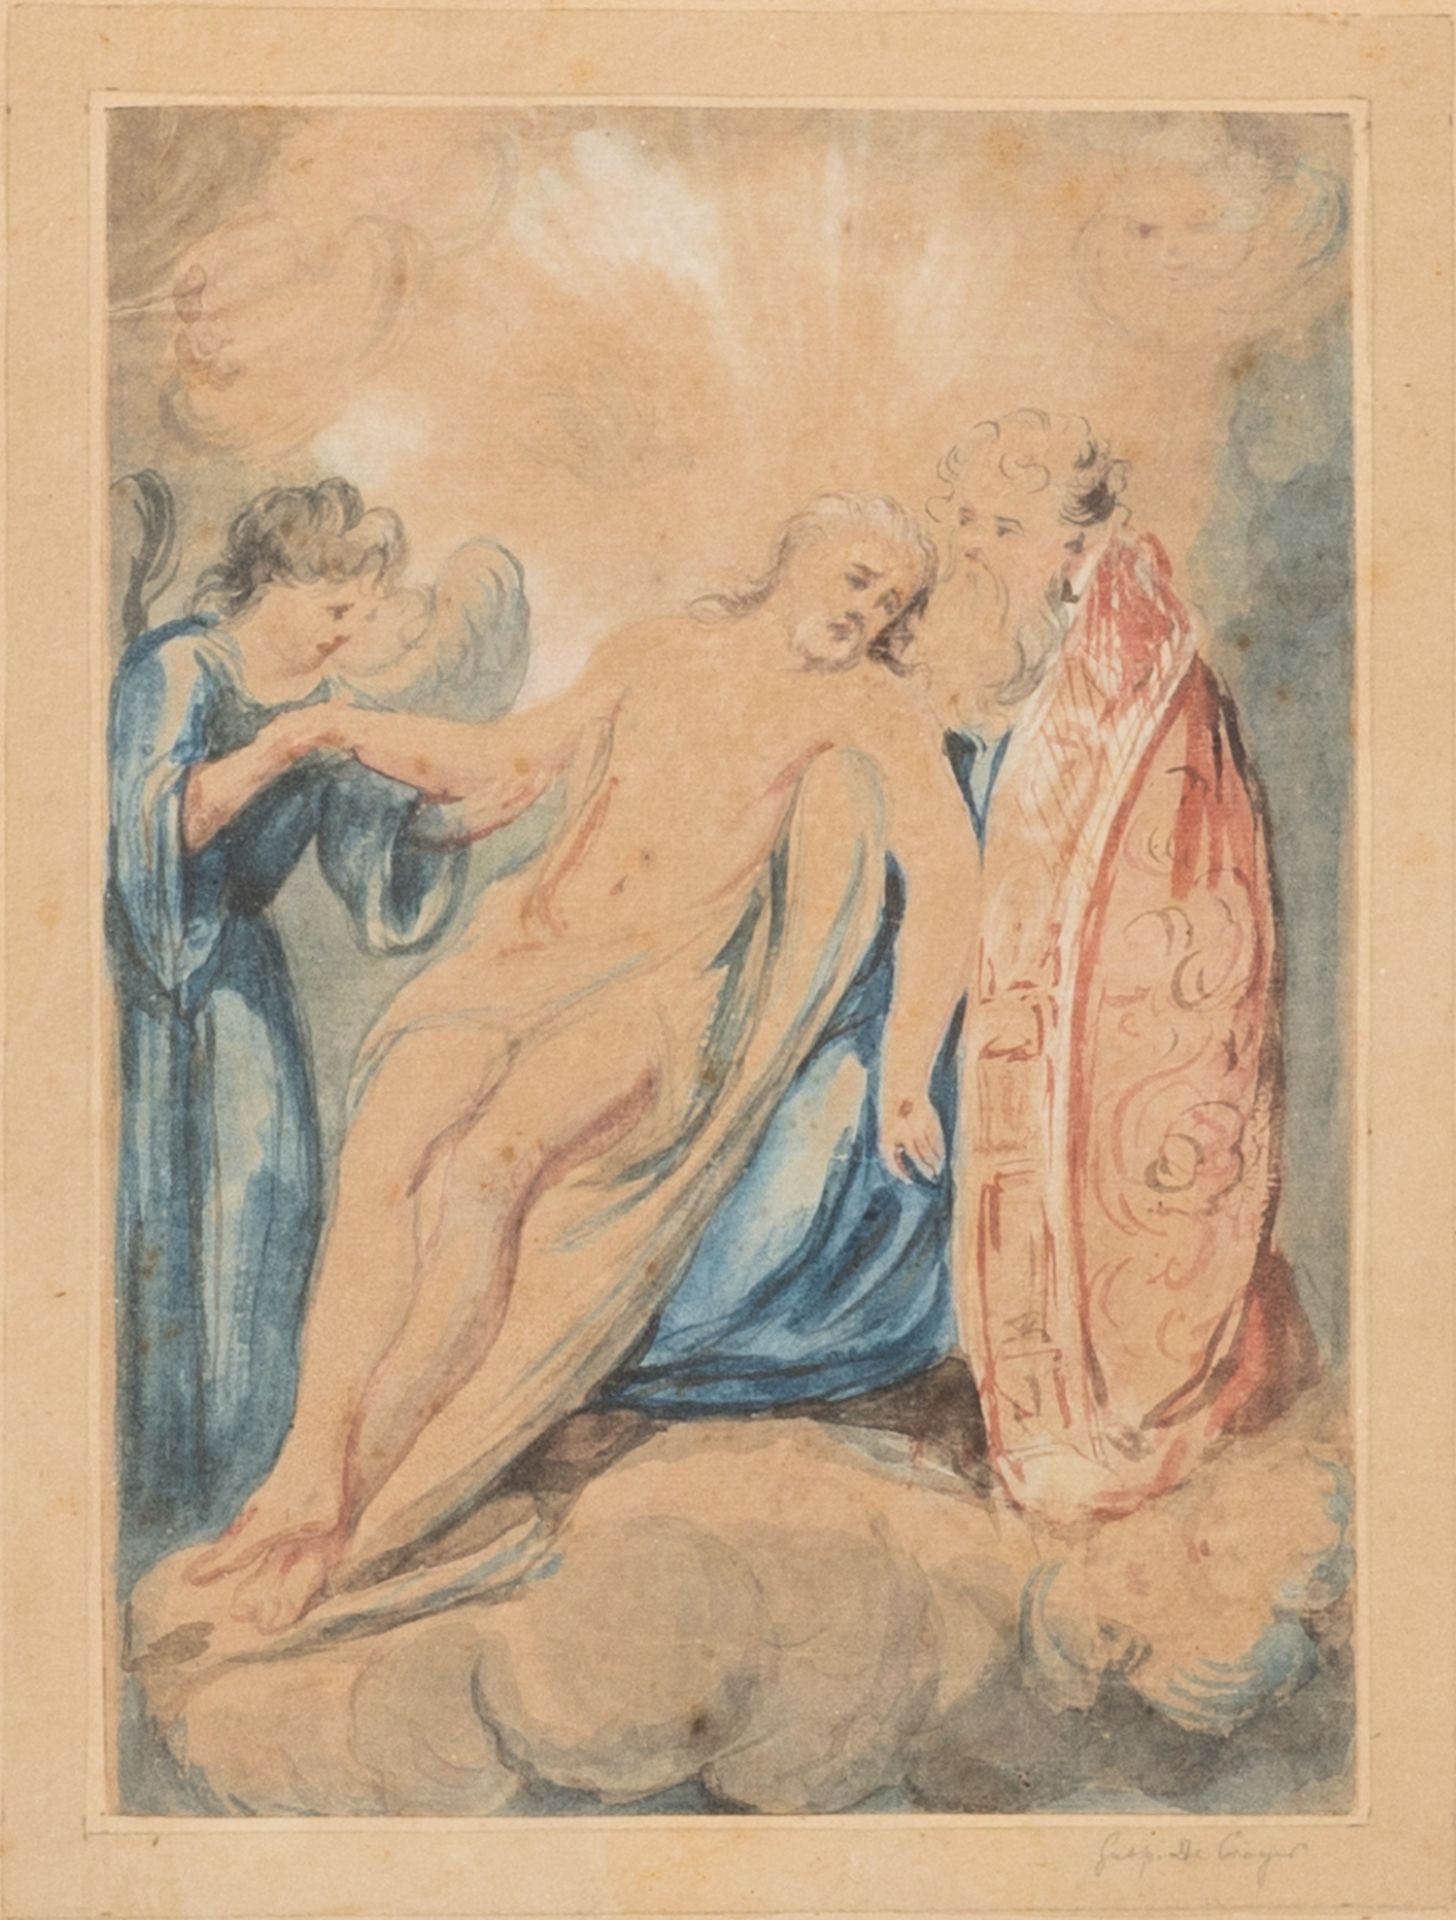 Flemish school, in the manner of Gaspard de Crayer (1584-1669): The ascension, watercolour on paper,